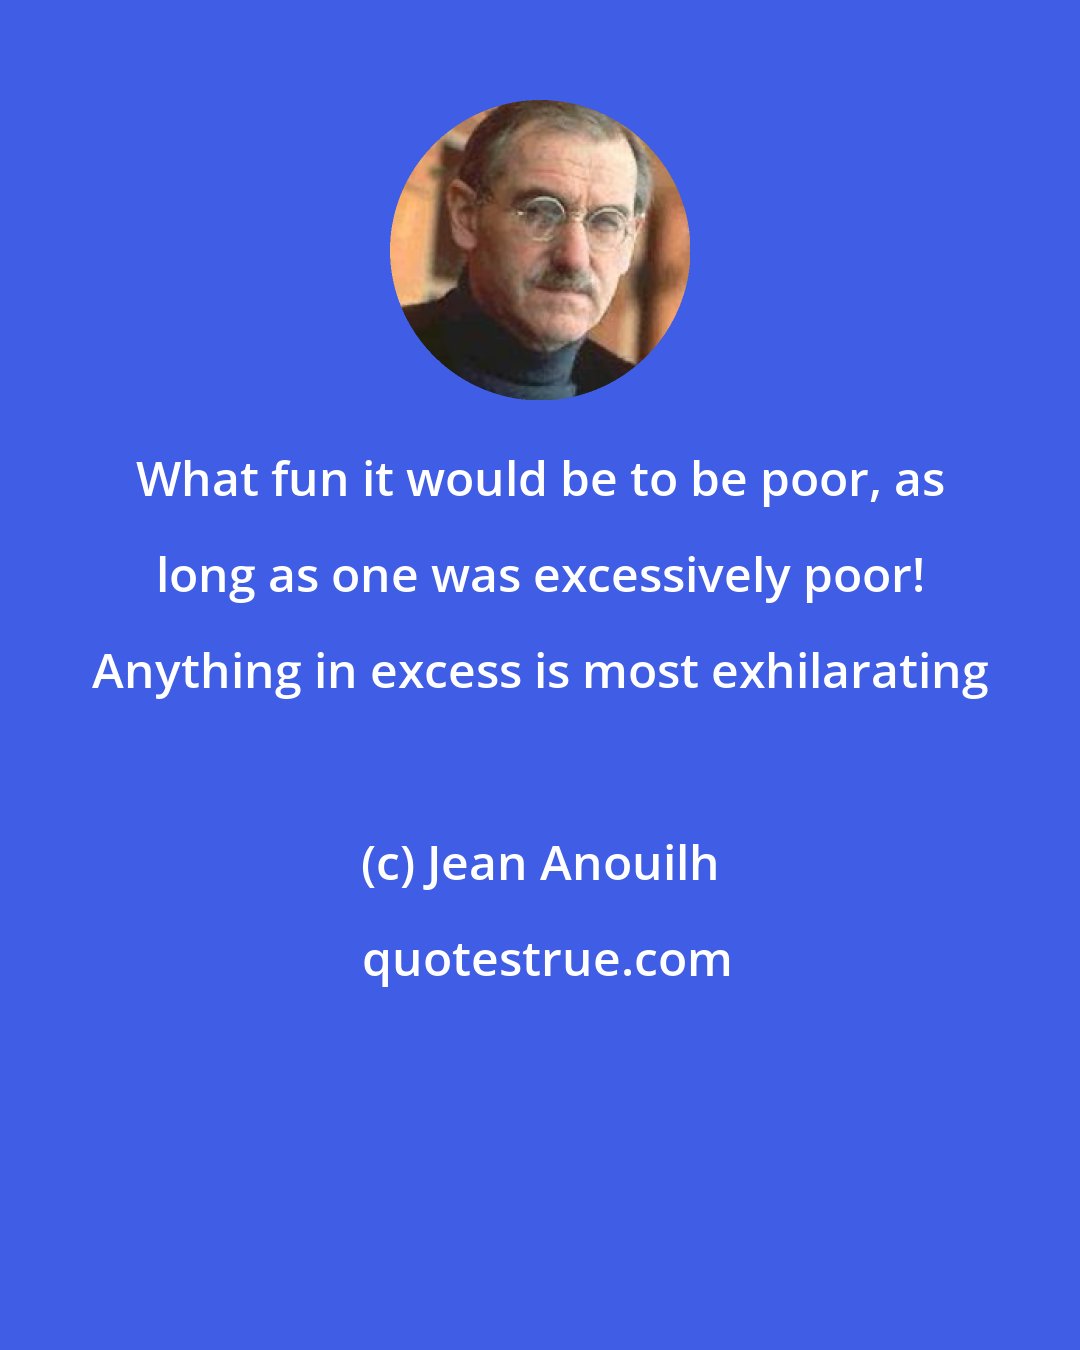 Jean Anouilh: What fun it would be to be poor, as long as one was excessively poor! Anything in excess is most exhilarating